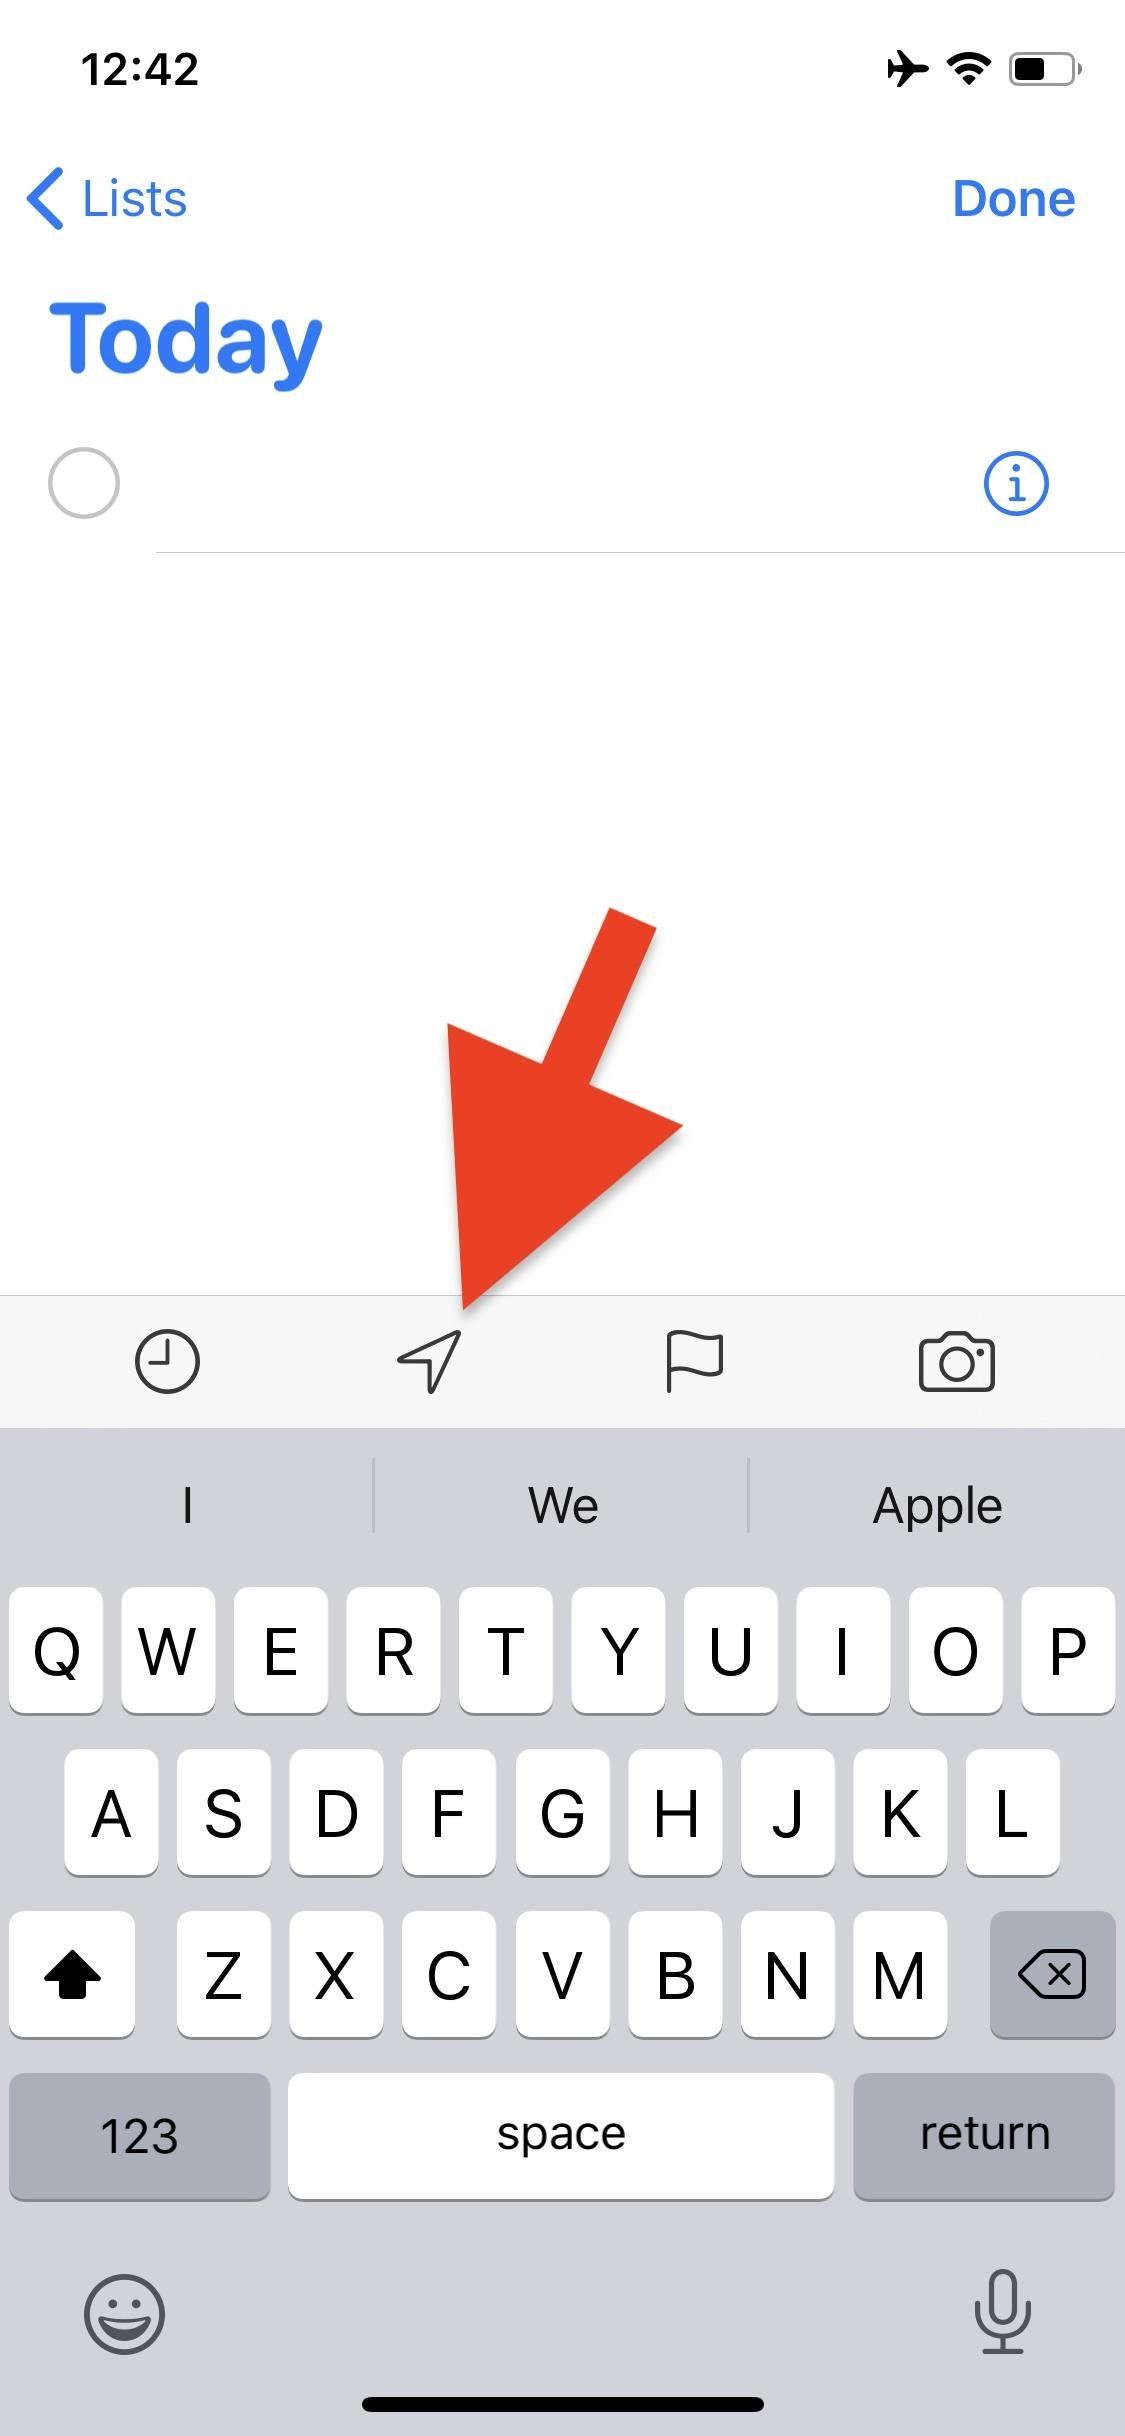 How to Set & Trigger Location-Based Reminders on Your iPhone